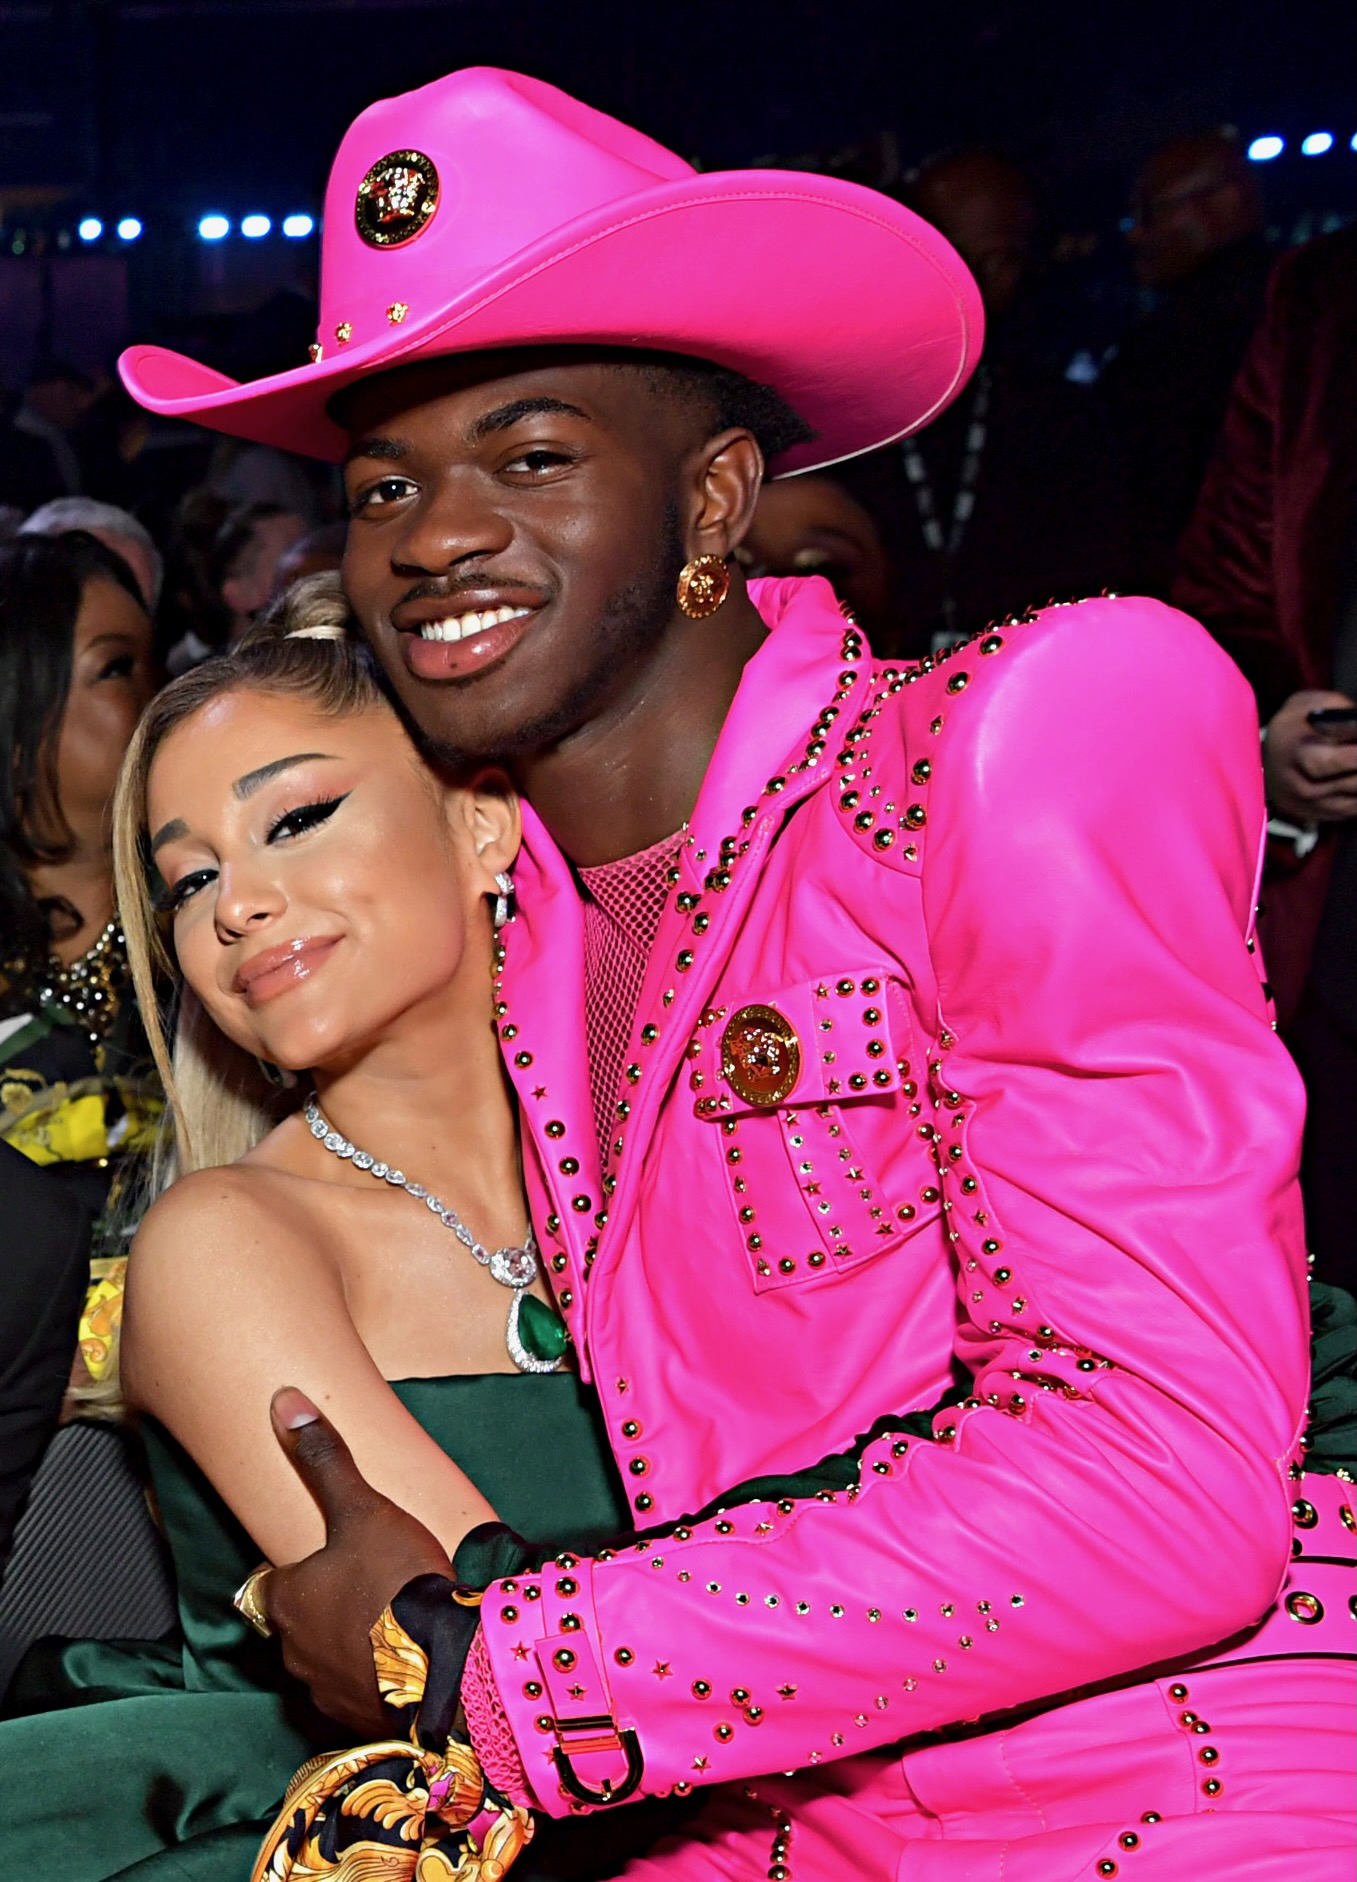 CONSEQUENCE on X: "Ariana Grande and Lil Nas X are both releasing new songs  on Friday. Grande will unveil "yes, and?", her first new solo music since  2020's Positions. Lil Nas X's